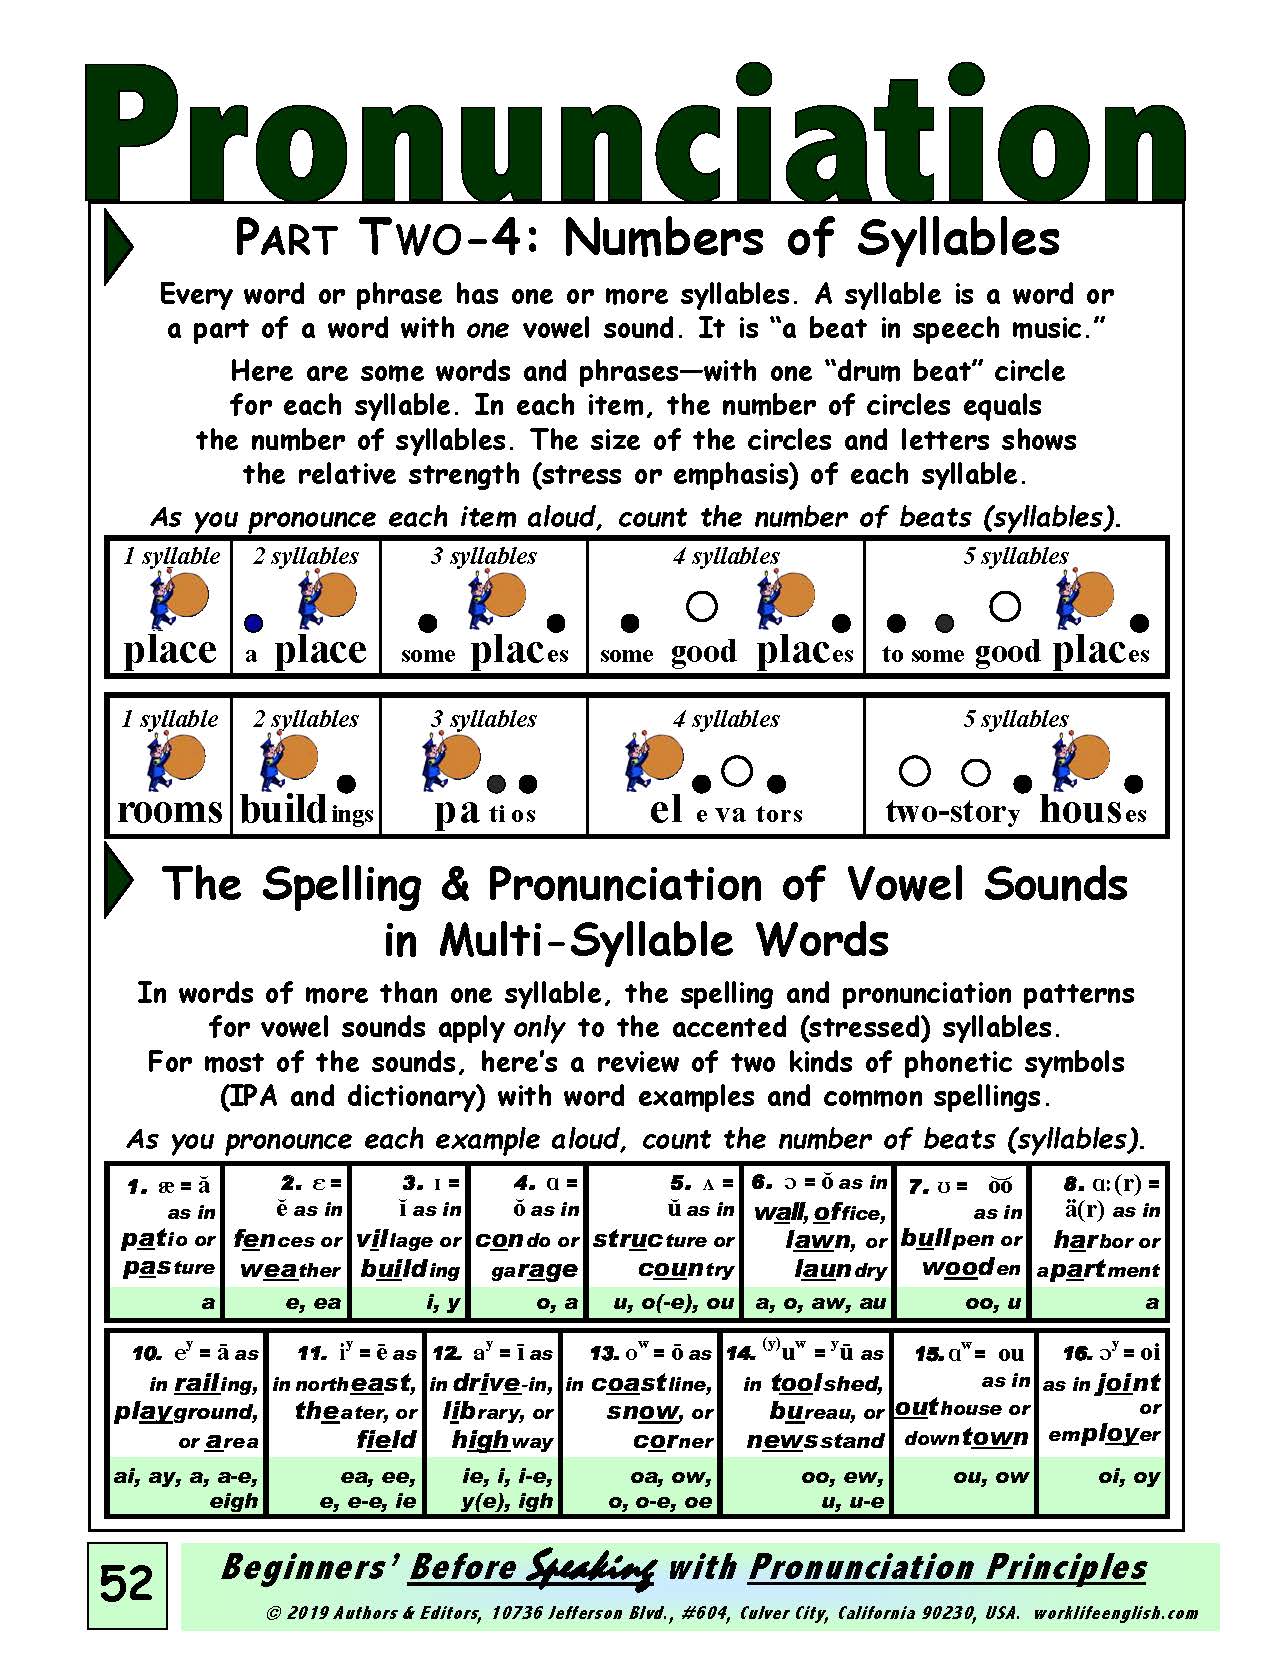 E-02.01 Noting Numbers of Syllables, Get & Use Language for Place Description